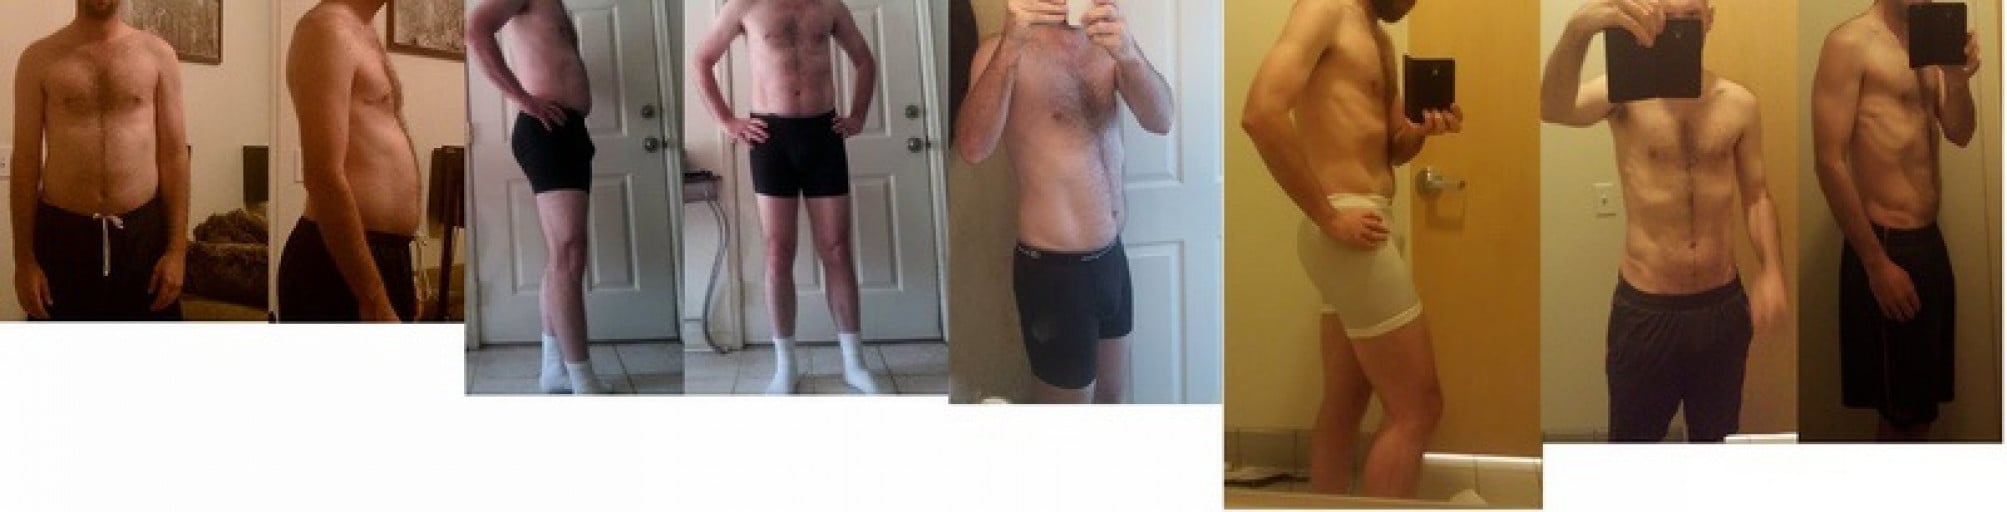 A photo of a 6'1" man showing a weight cut from 196 pounds to 159 pounds. A total loss of 37 pounds.